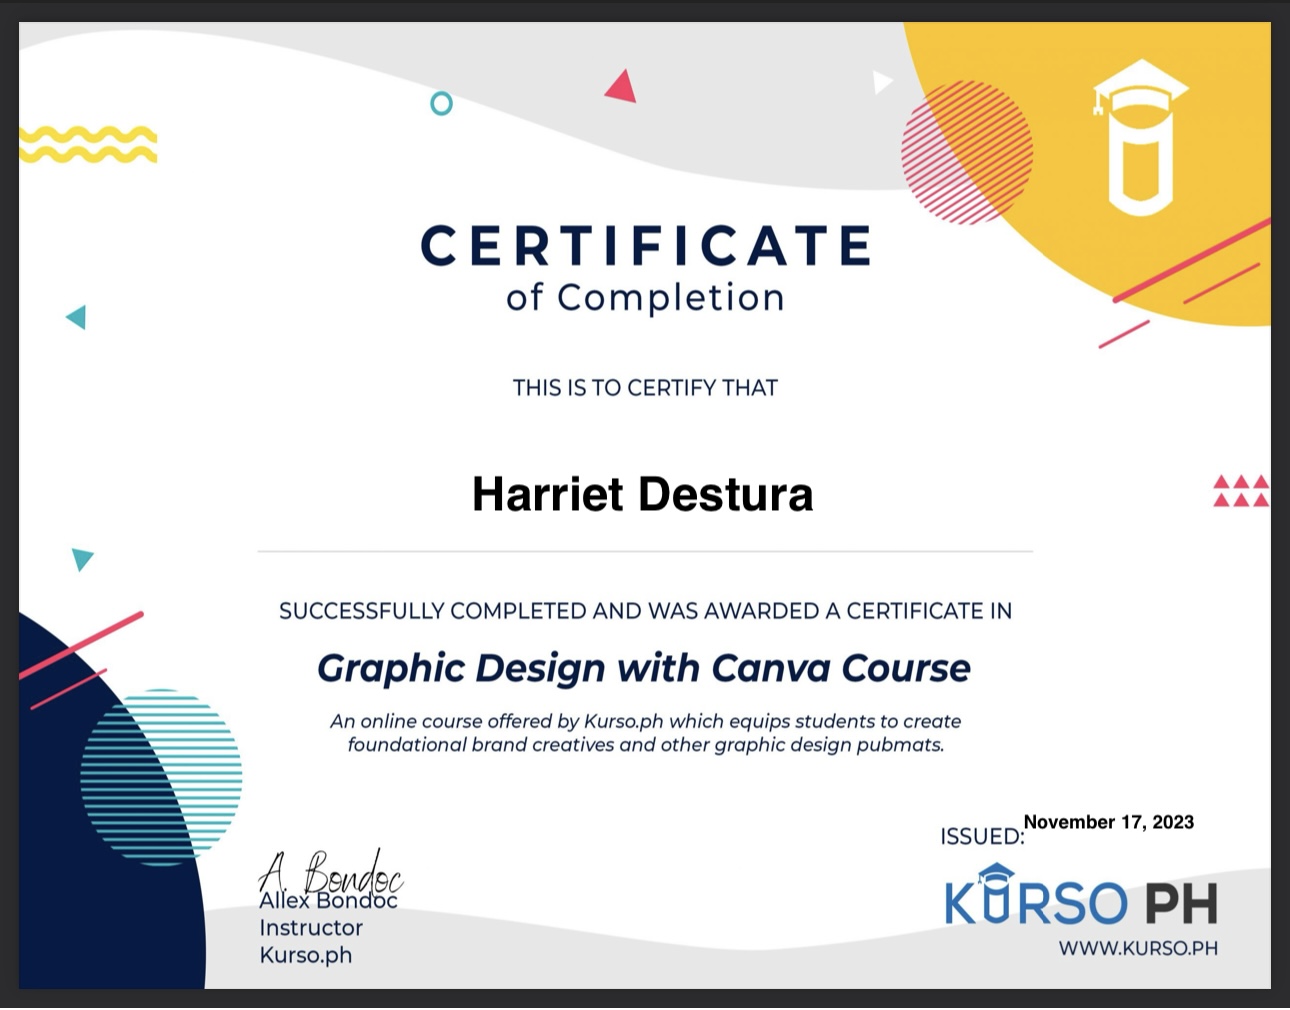 Graphic design with Canva course